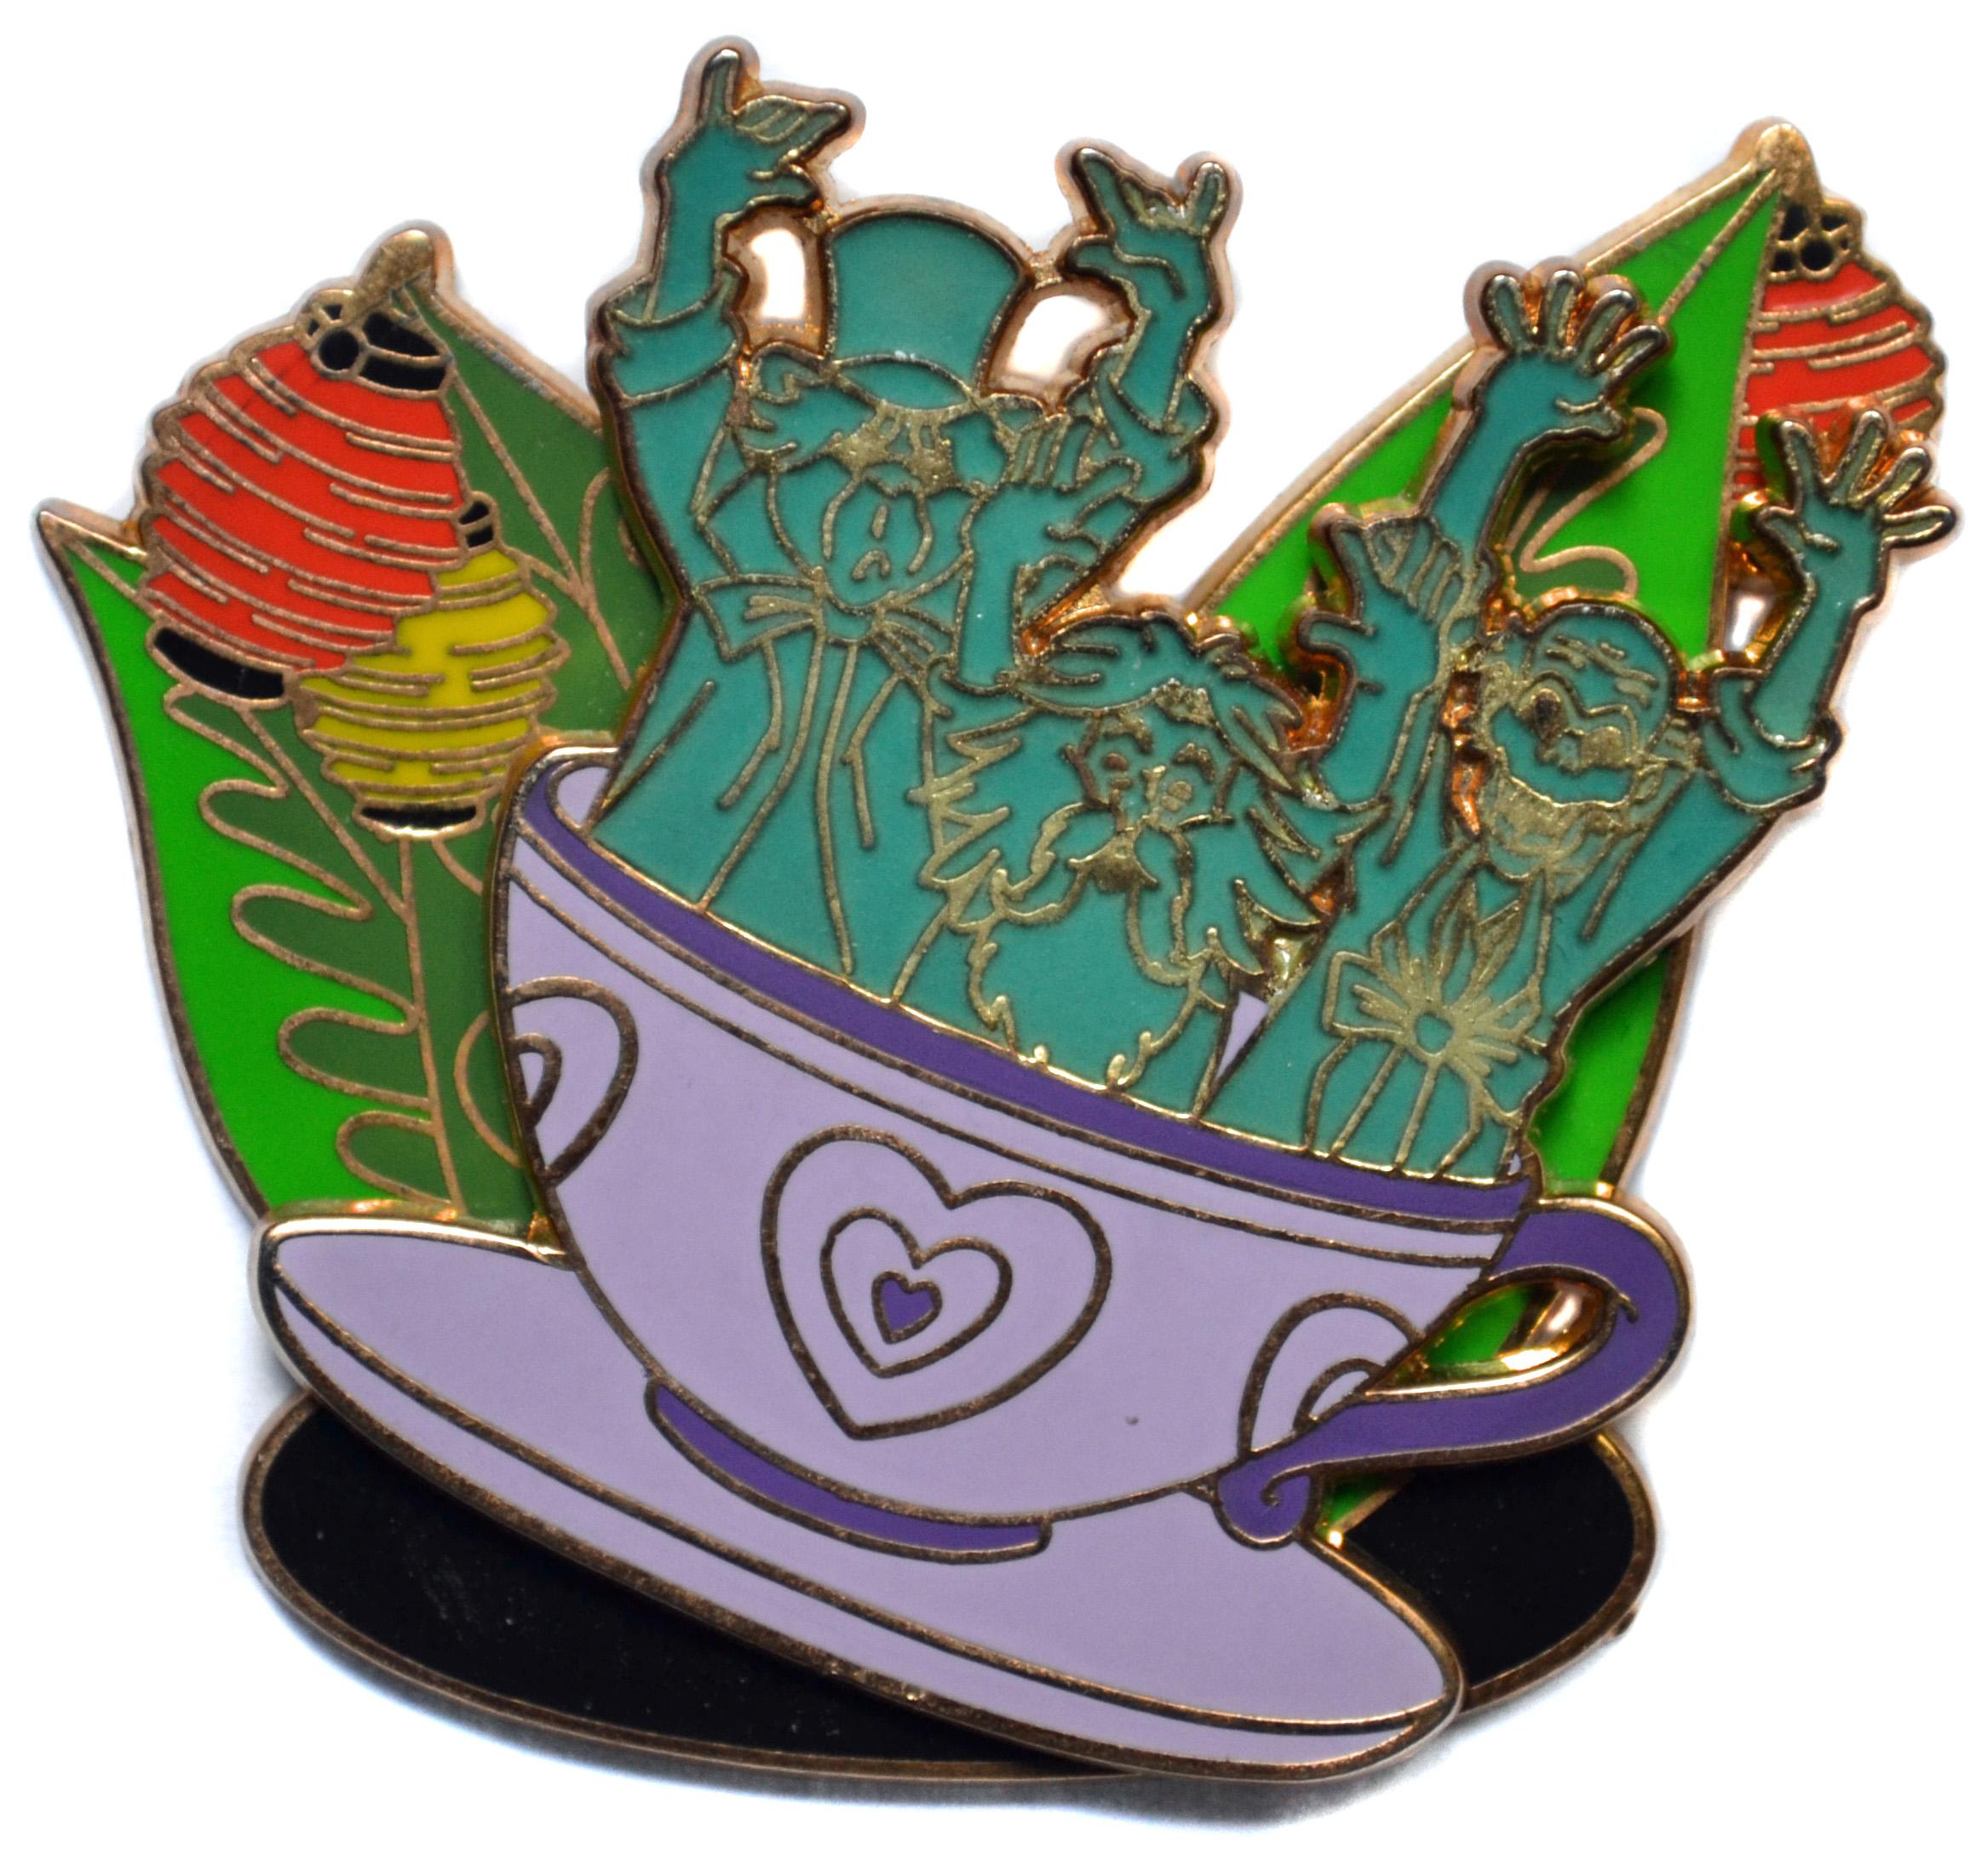 DLR - Oogie Boogie's Ghost Walk Pin Event (The Mad Tea Party) Slider